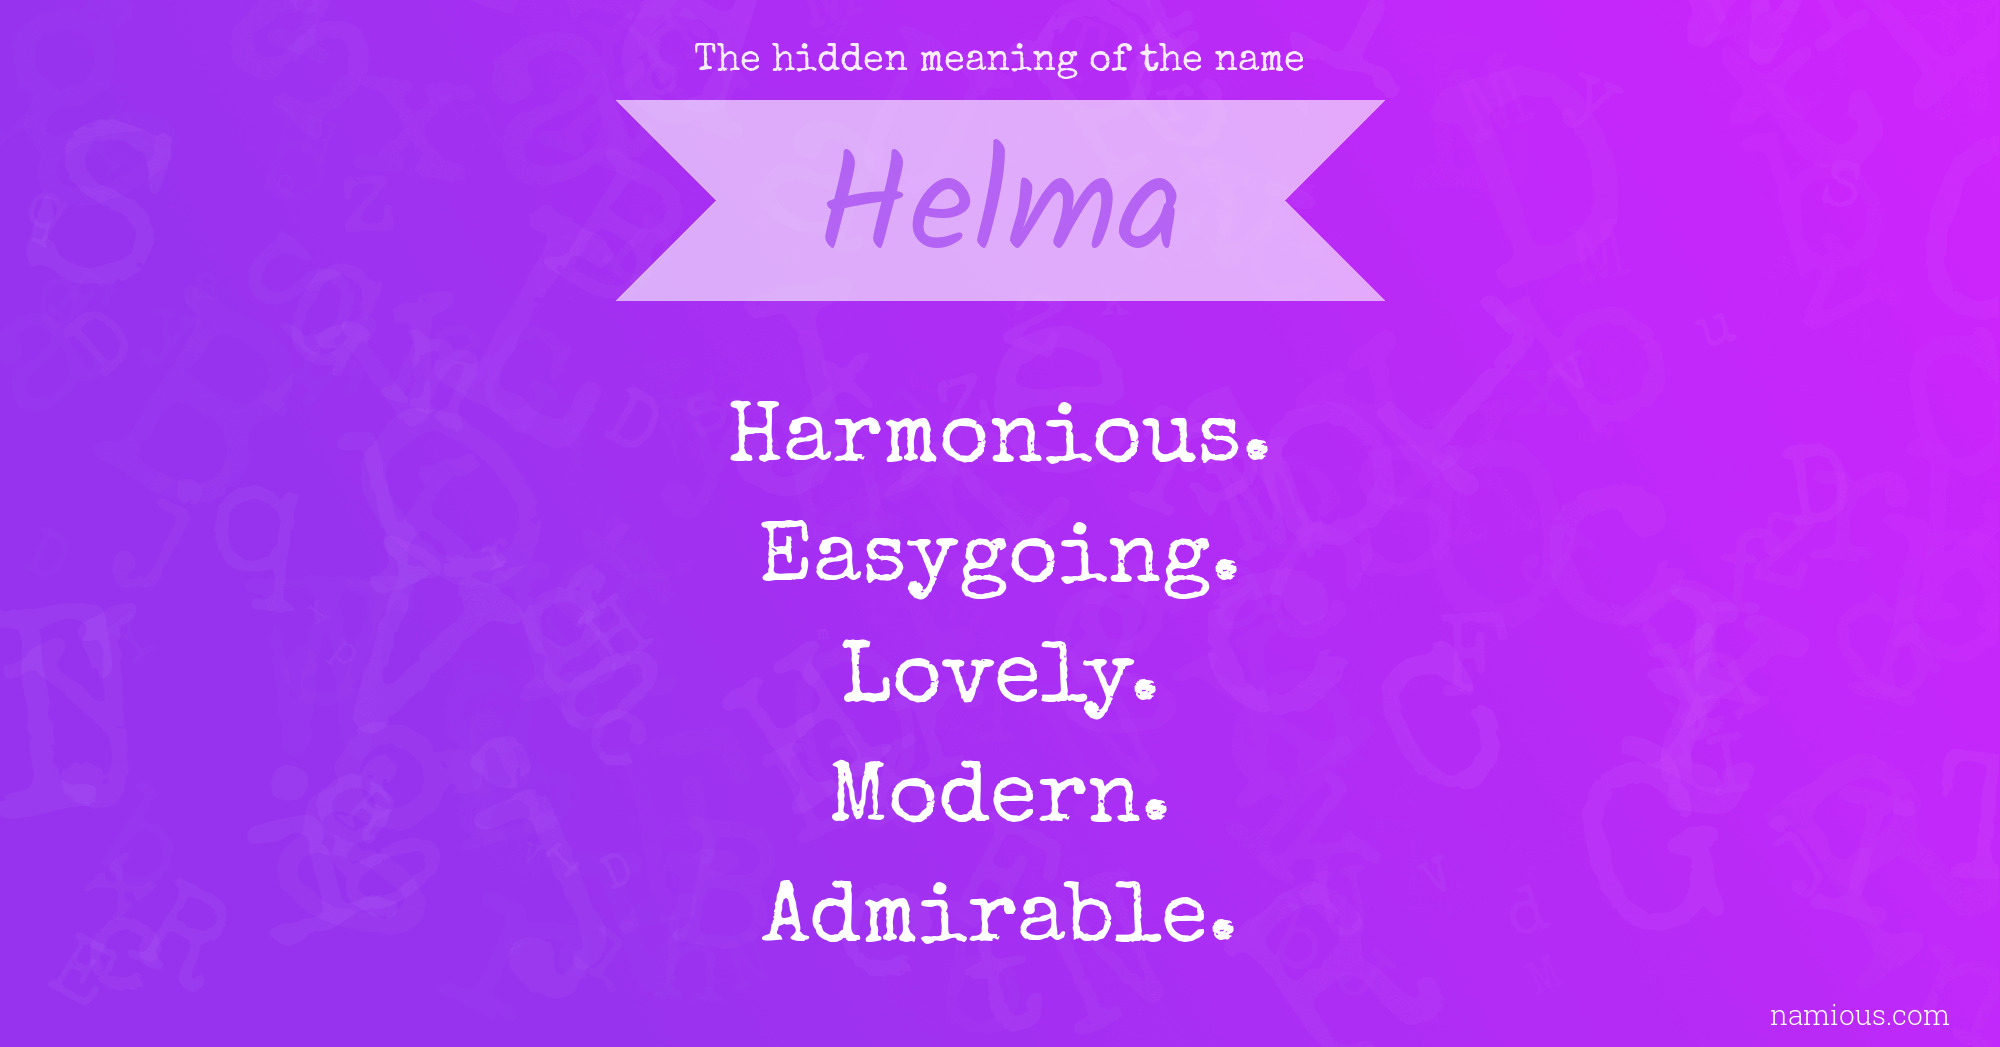 The hidden meaning of the name Helma